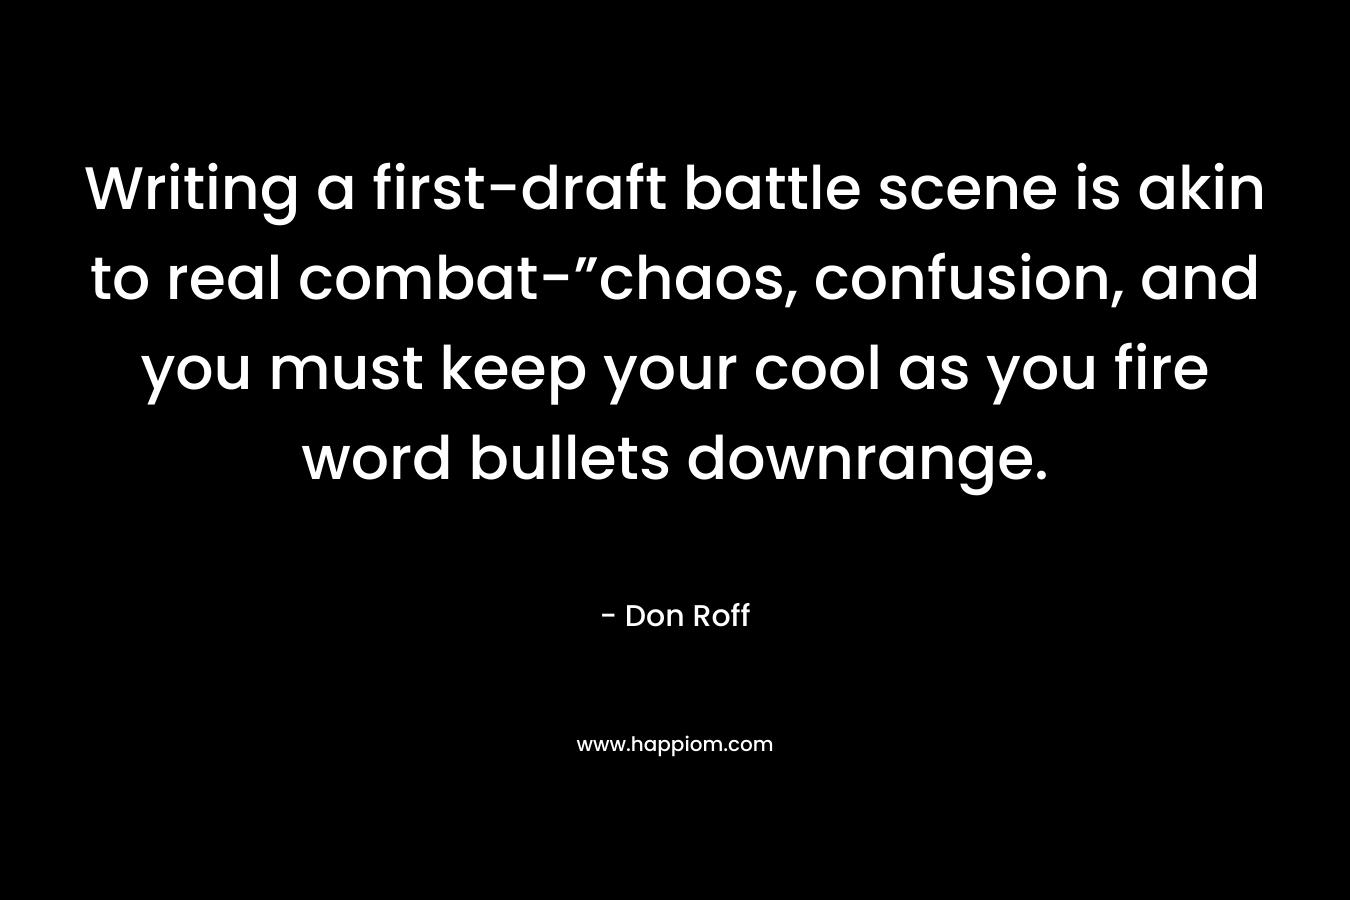 Writing a first-draft battle scene is akin to real combat-”chaos, confusion, and you must keep your cool as you fire word bullets downrange.